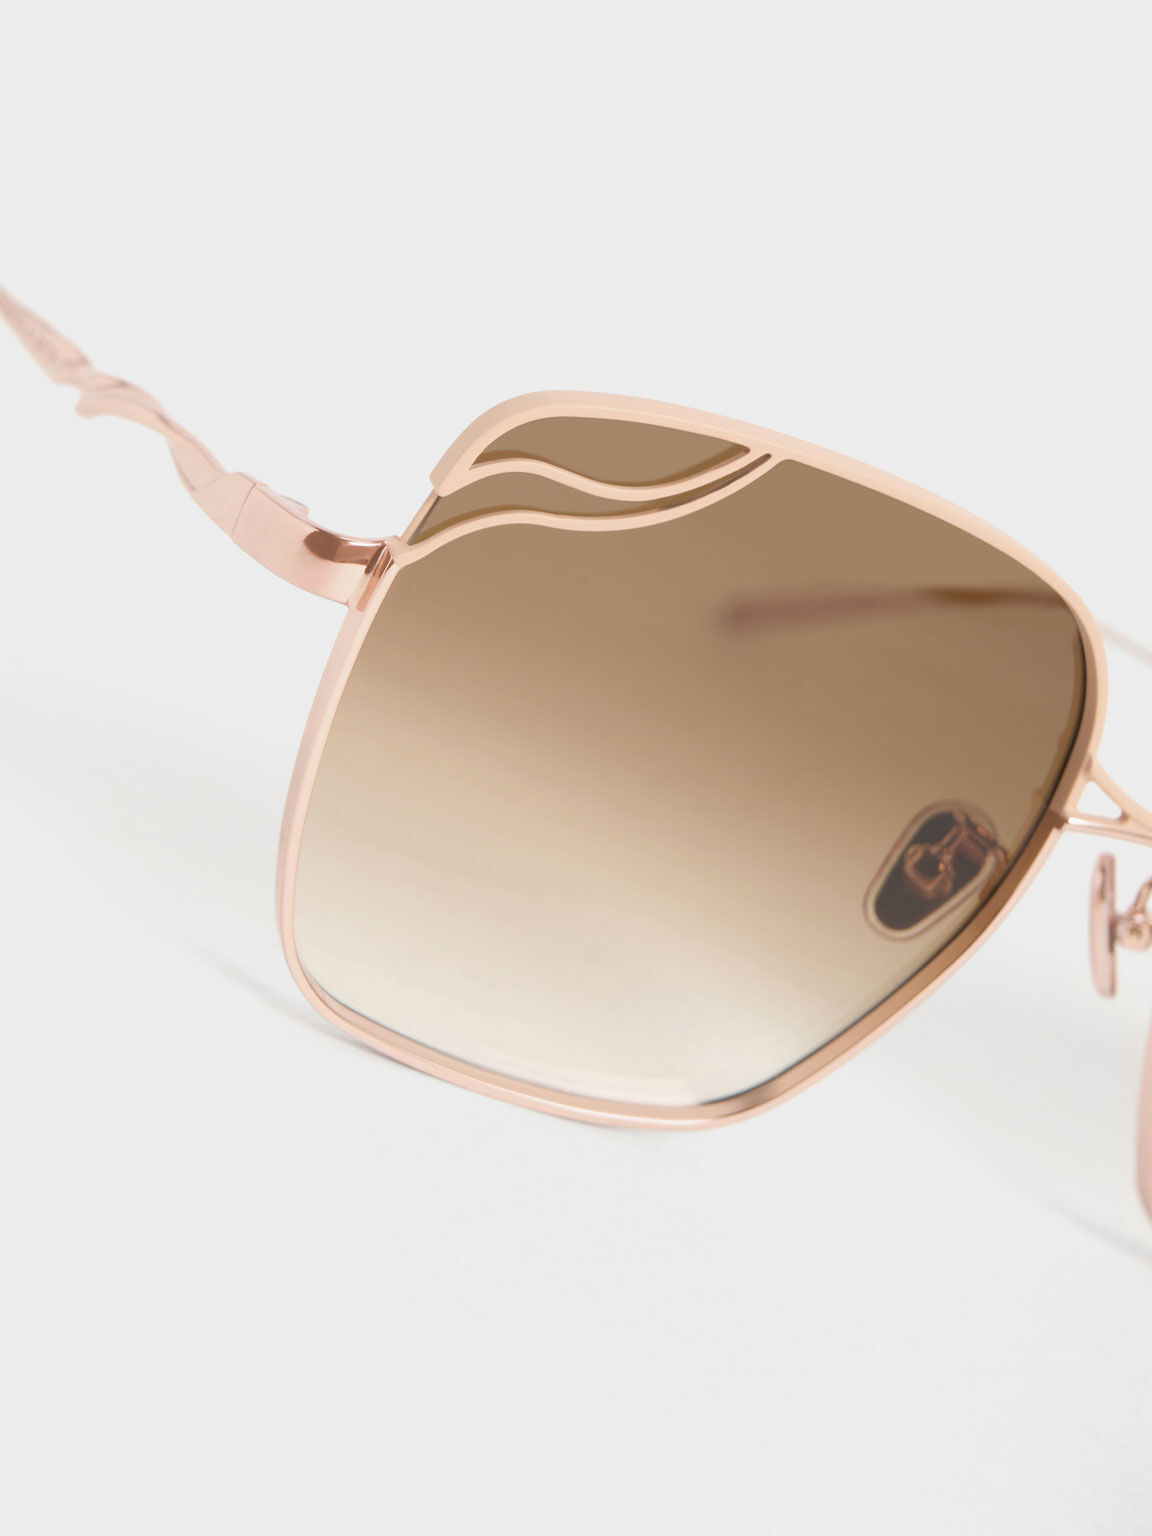 Wavy Wire-Frame Square Sunglasses, Pink, hi-res